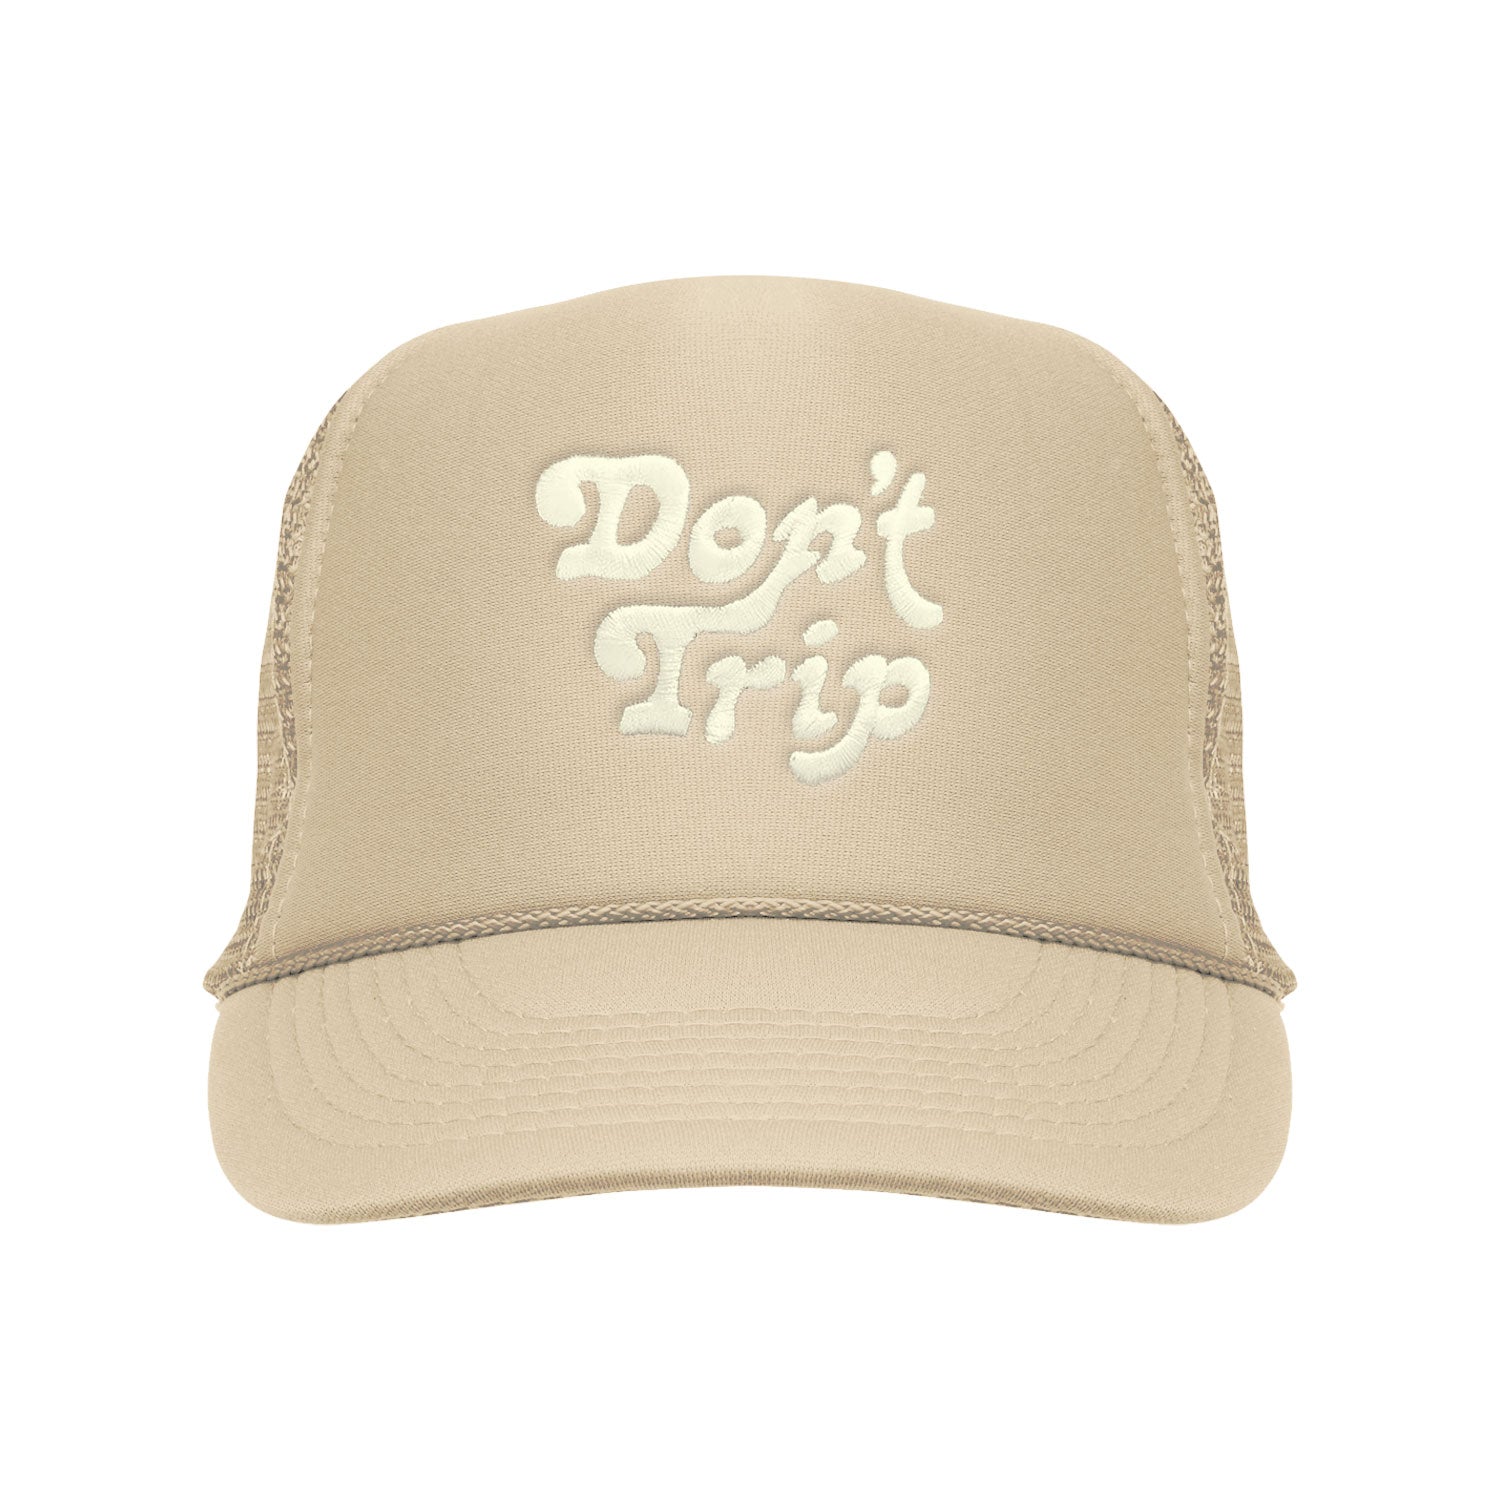 Don't Trip Embroidered Trucker Hat